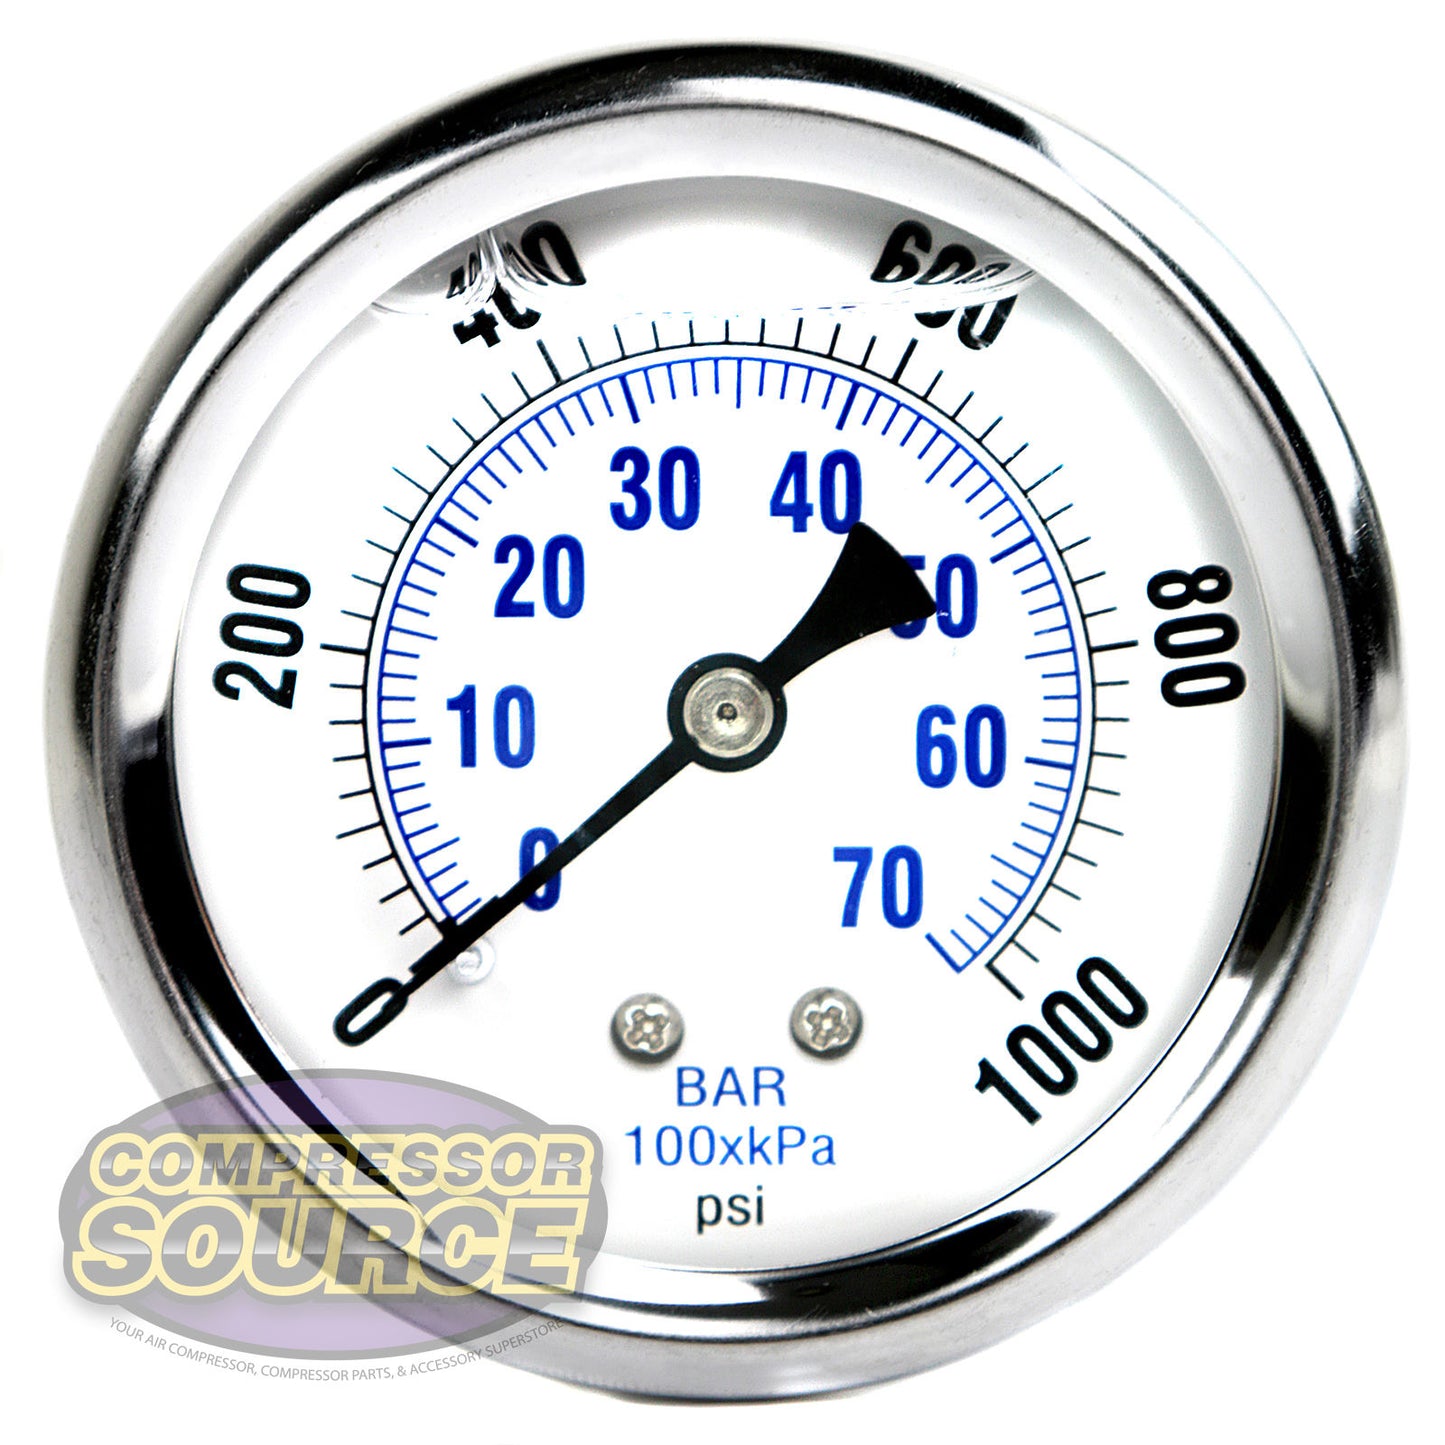 Liquid Filled 0-1,000 PSI Center Back Mount Air Pressure Gauge With 2.5" Face